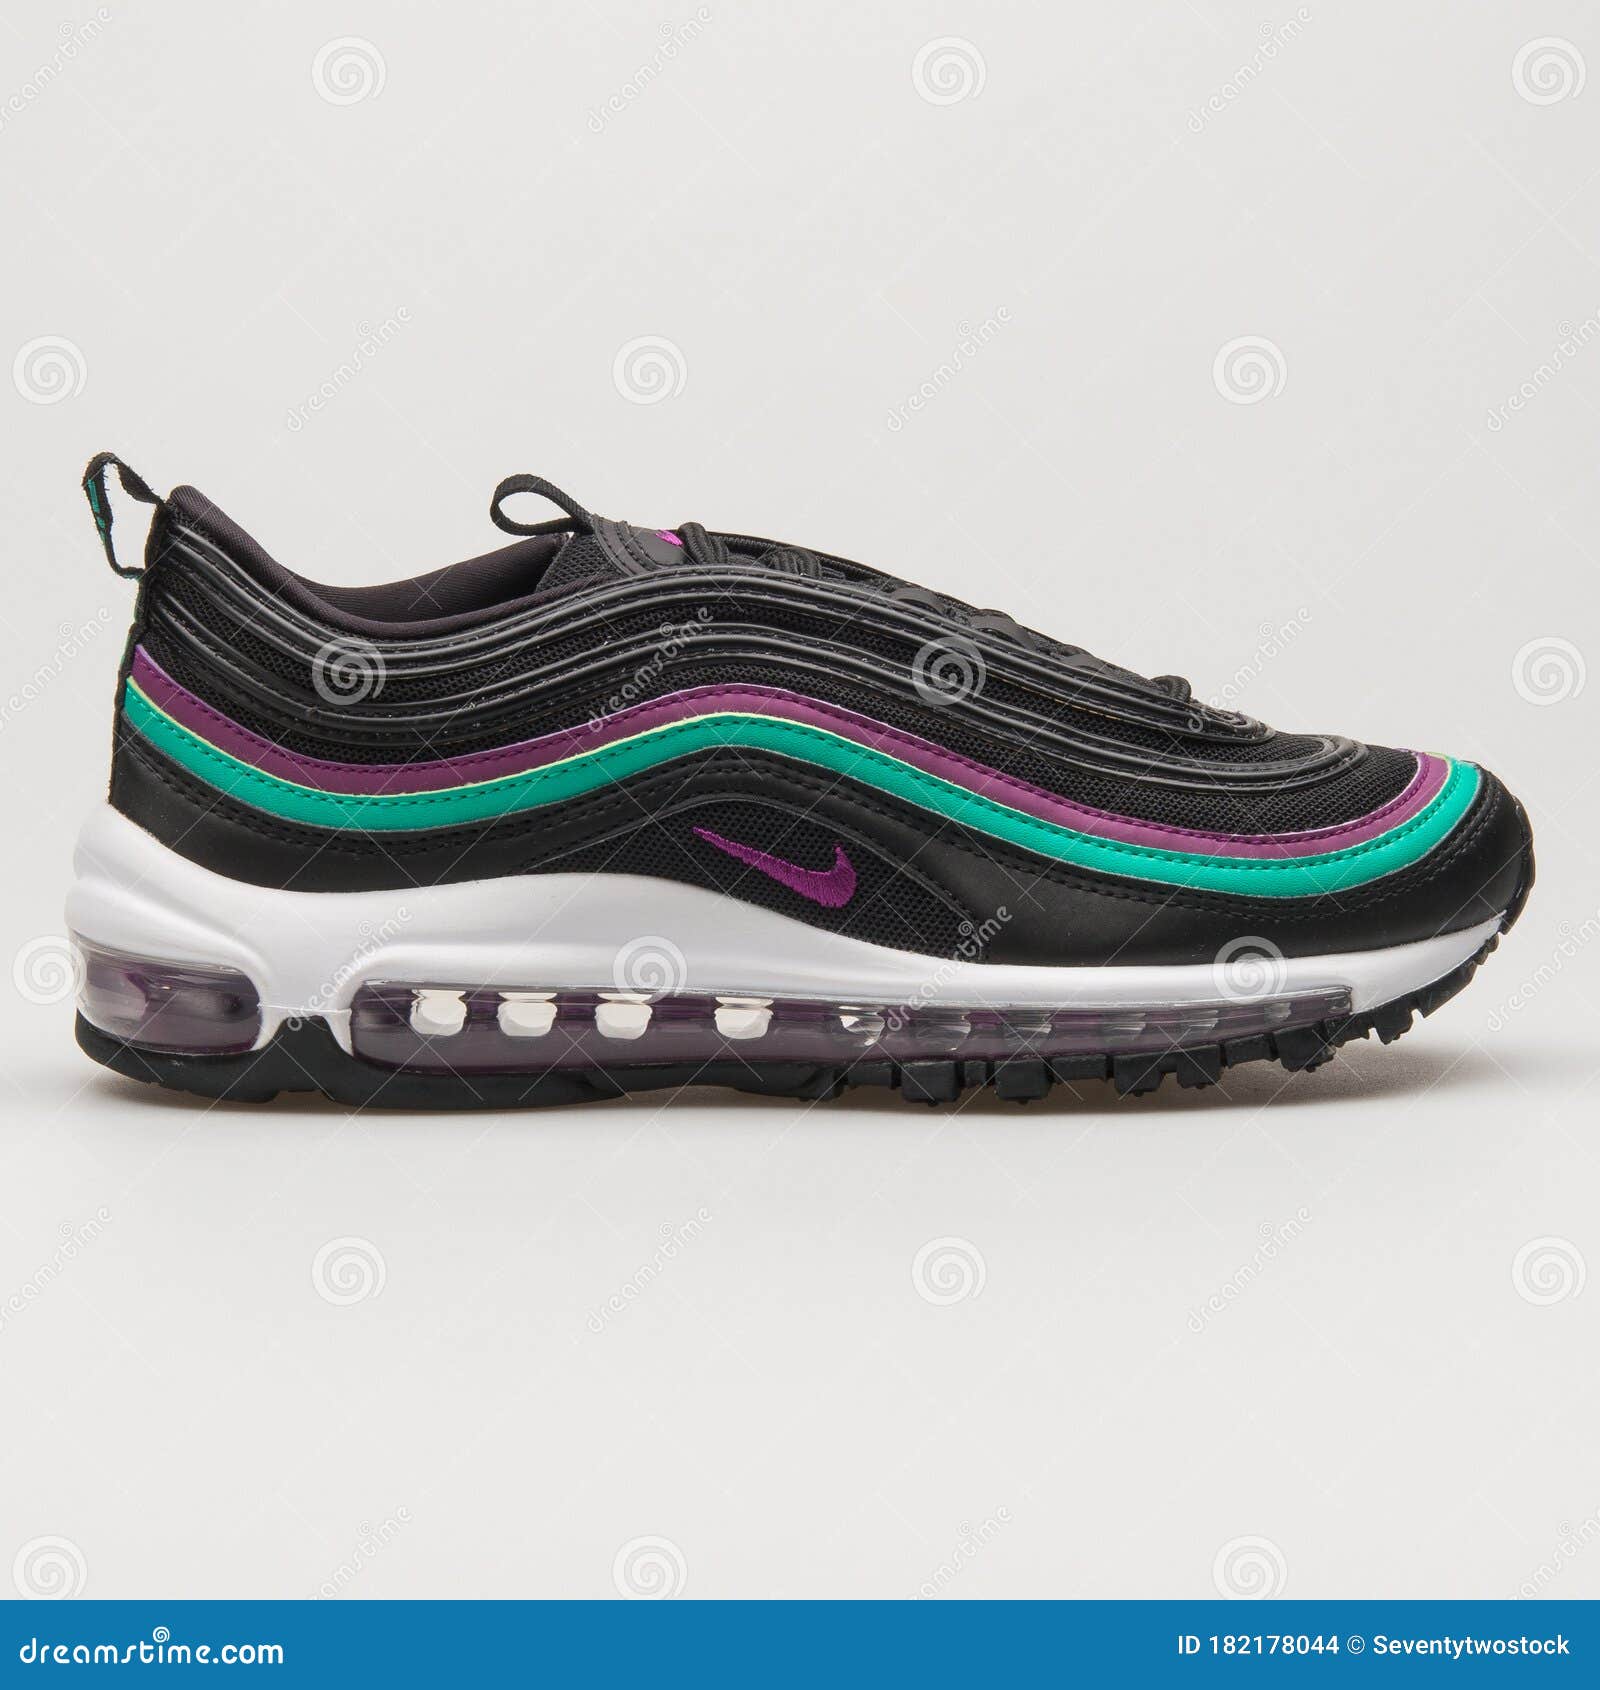 Nike Air Max 97 Black, Green and Purple Sneaker Editorial Stock Image -  Image of fitness, running: 182178044